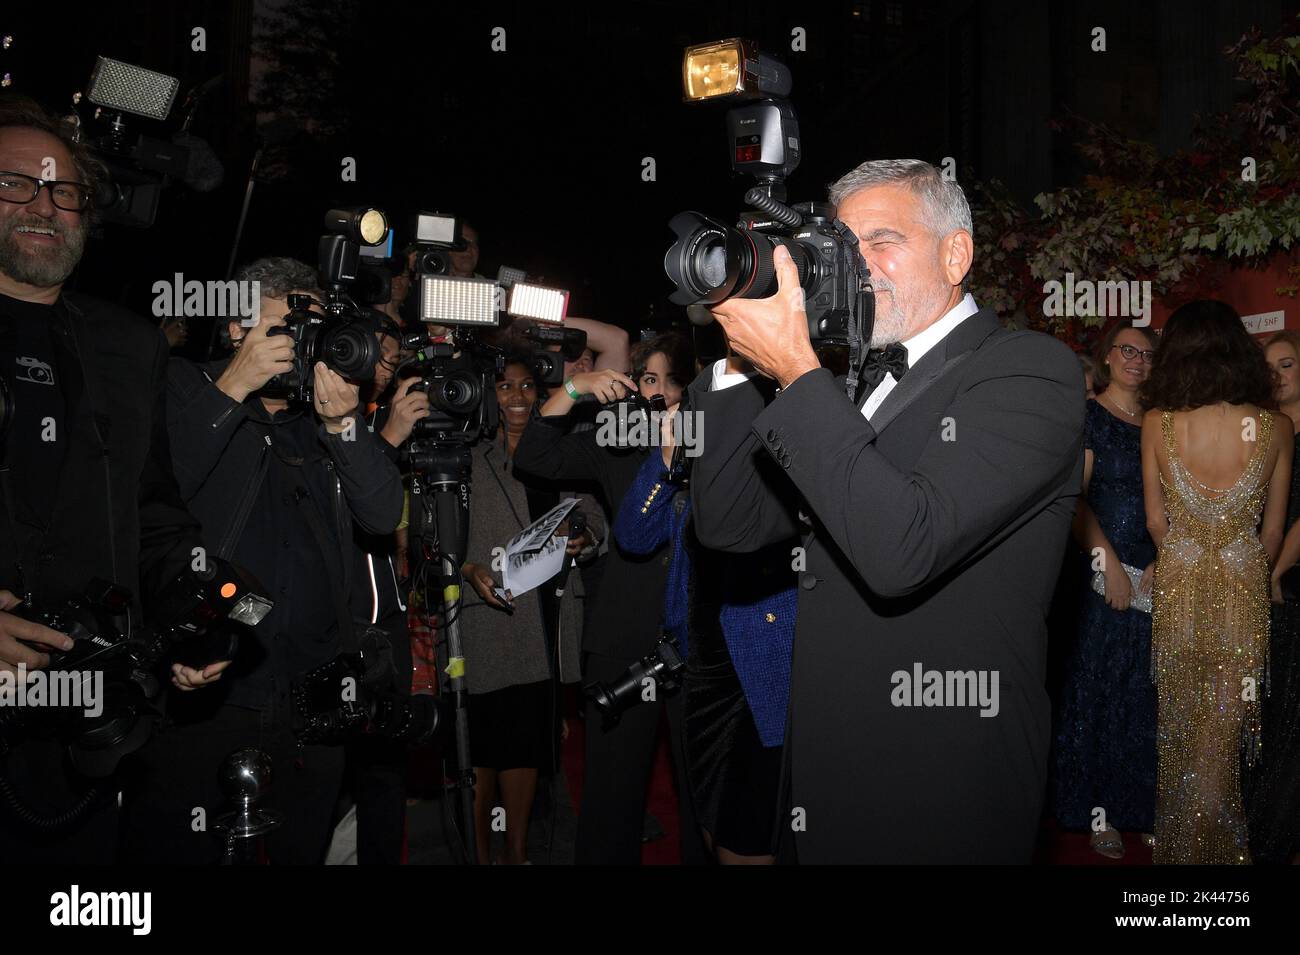 New York, USA. 29th Sep, 2022. George Clooney takes pictures with a camera from a red carpet photographer as he attends the Albie Awards hosted by the Clooney Foundation For Justice at the New York City Public Library, New York, NY, September 29, 2022. (Photo by Anthony Behar/Sipa USA) Credit: Sipa USA/Alamy Live News Stock Photo